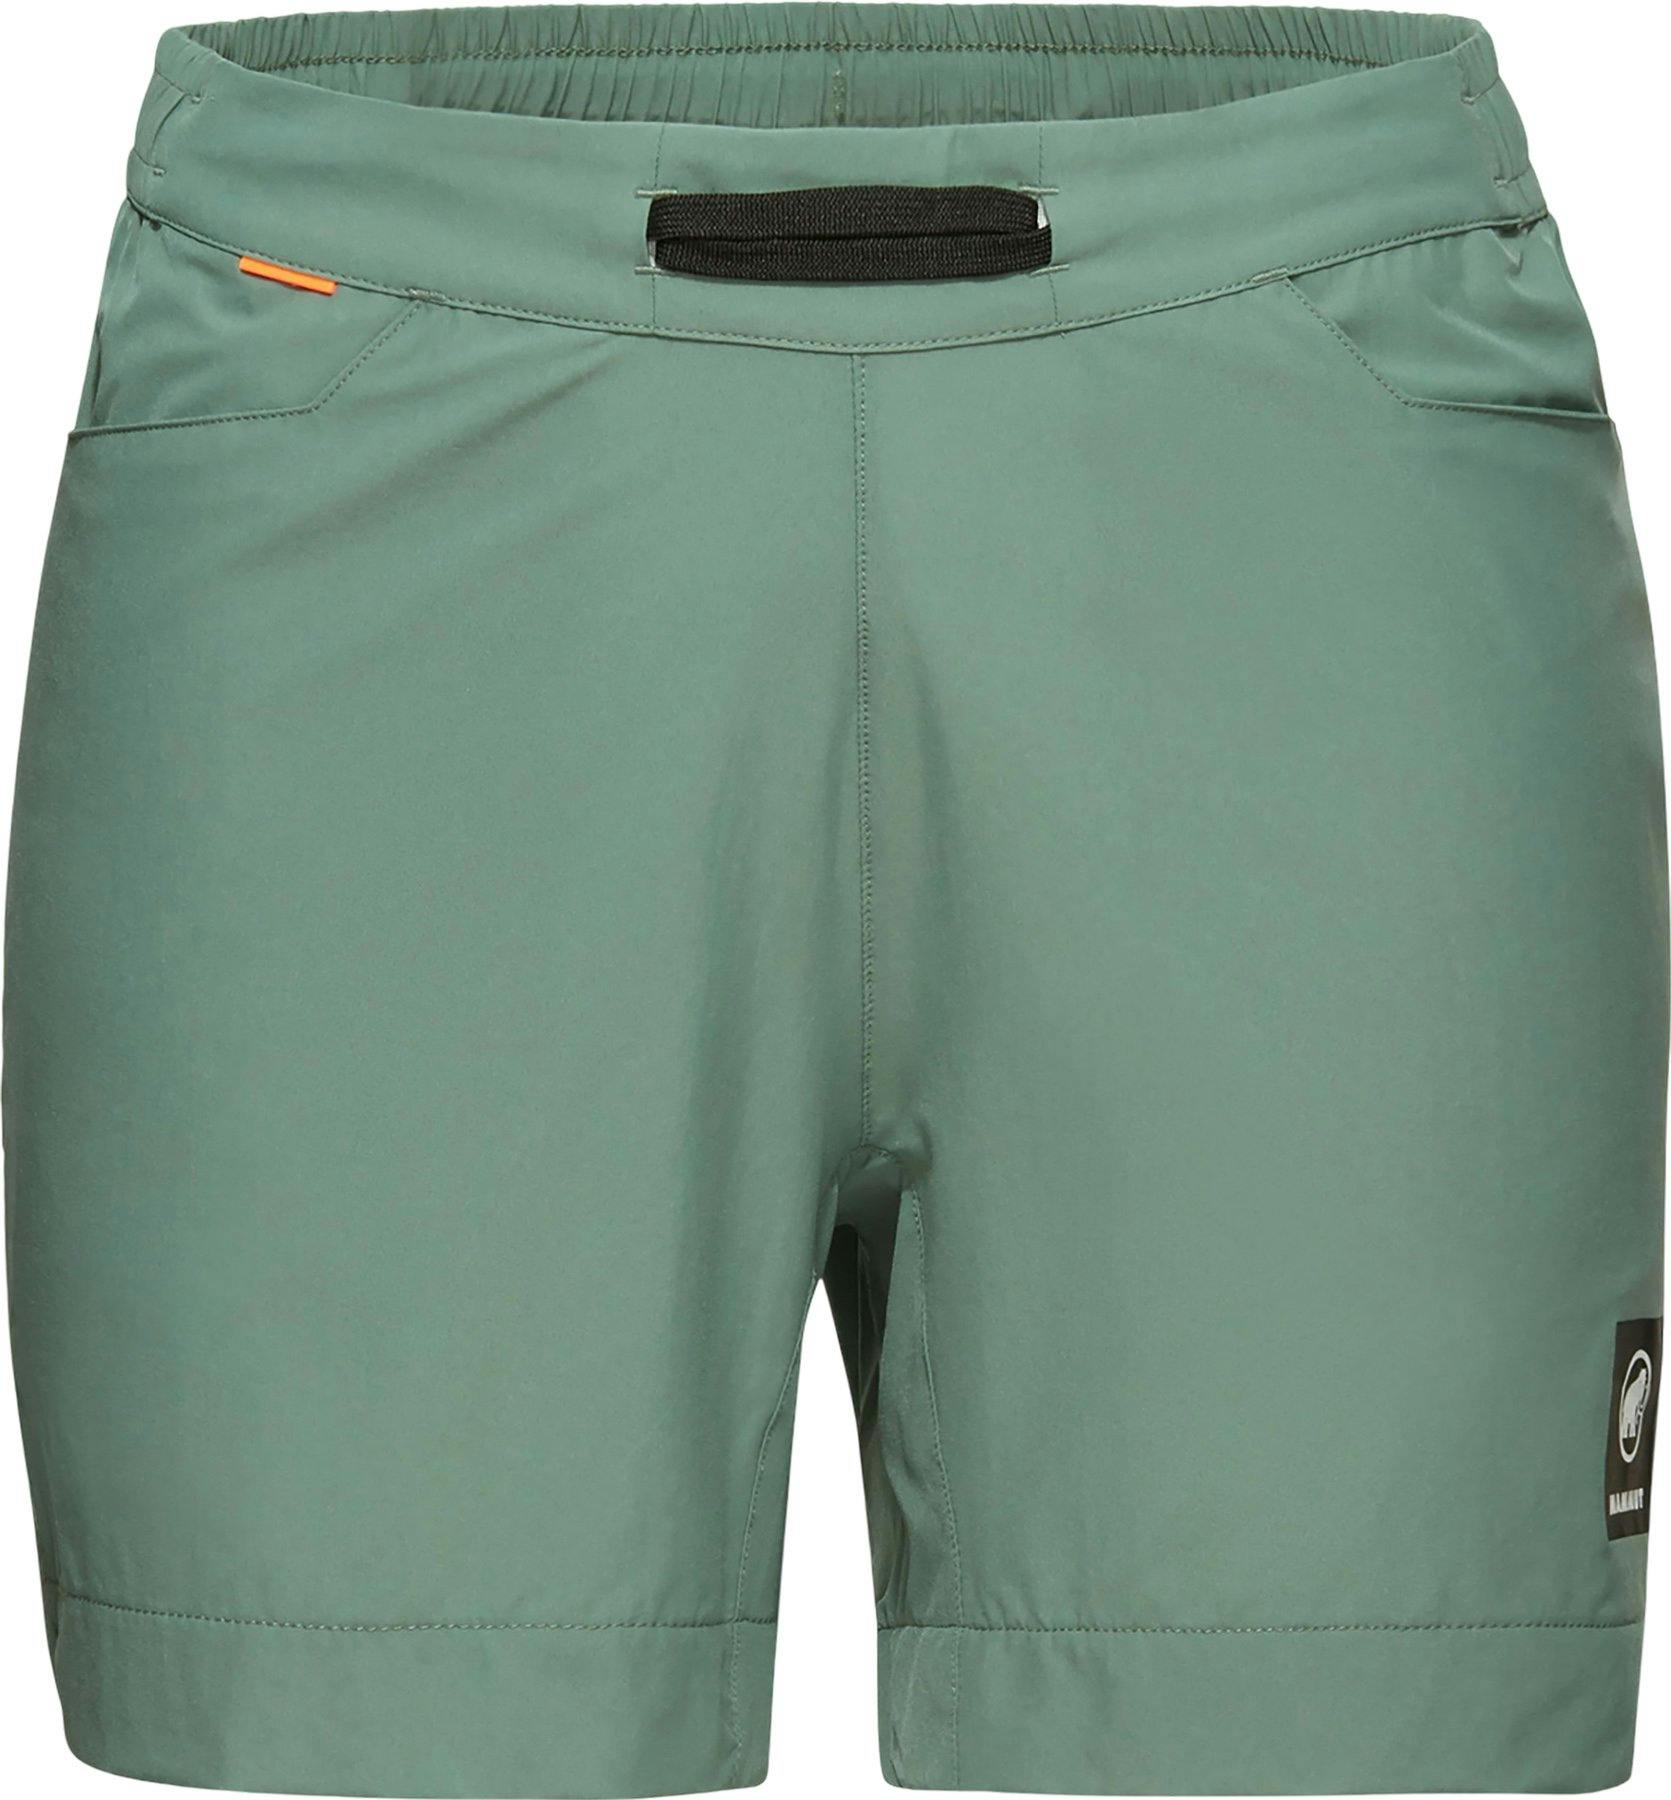 Product image for Massone Sport Shorts - Women's